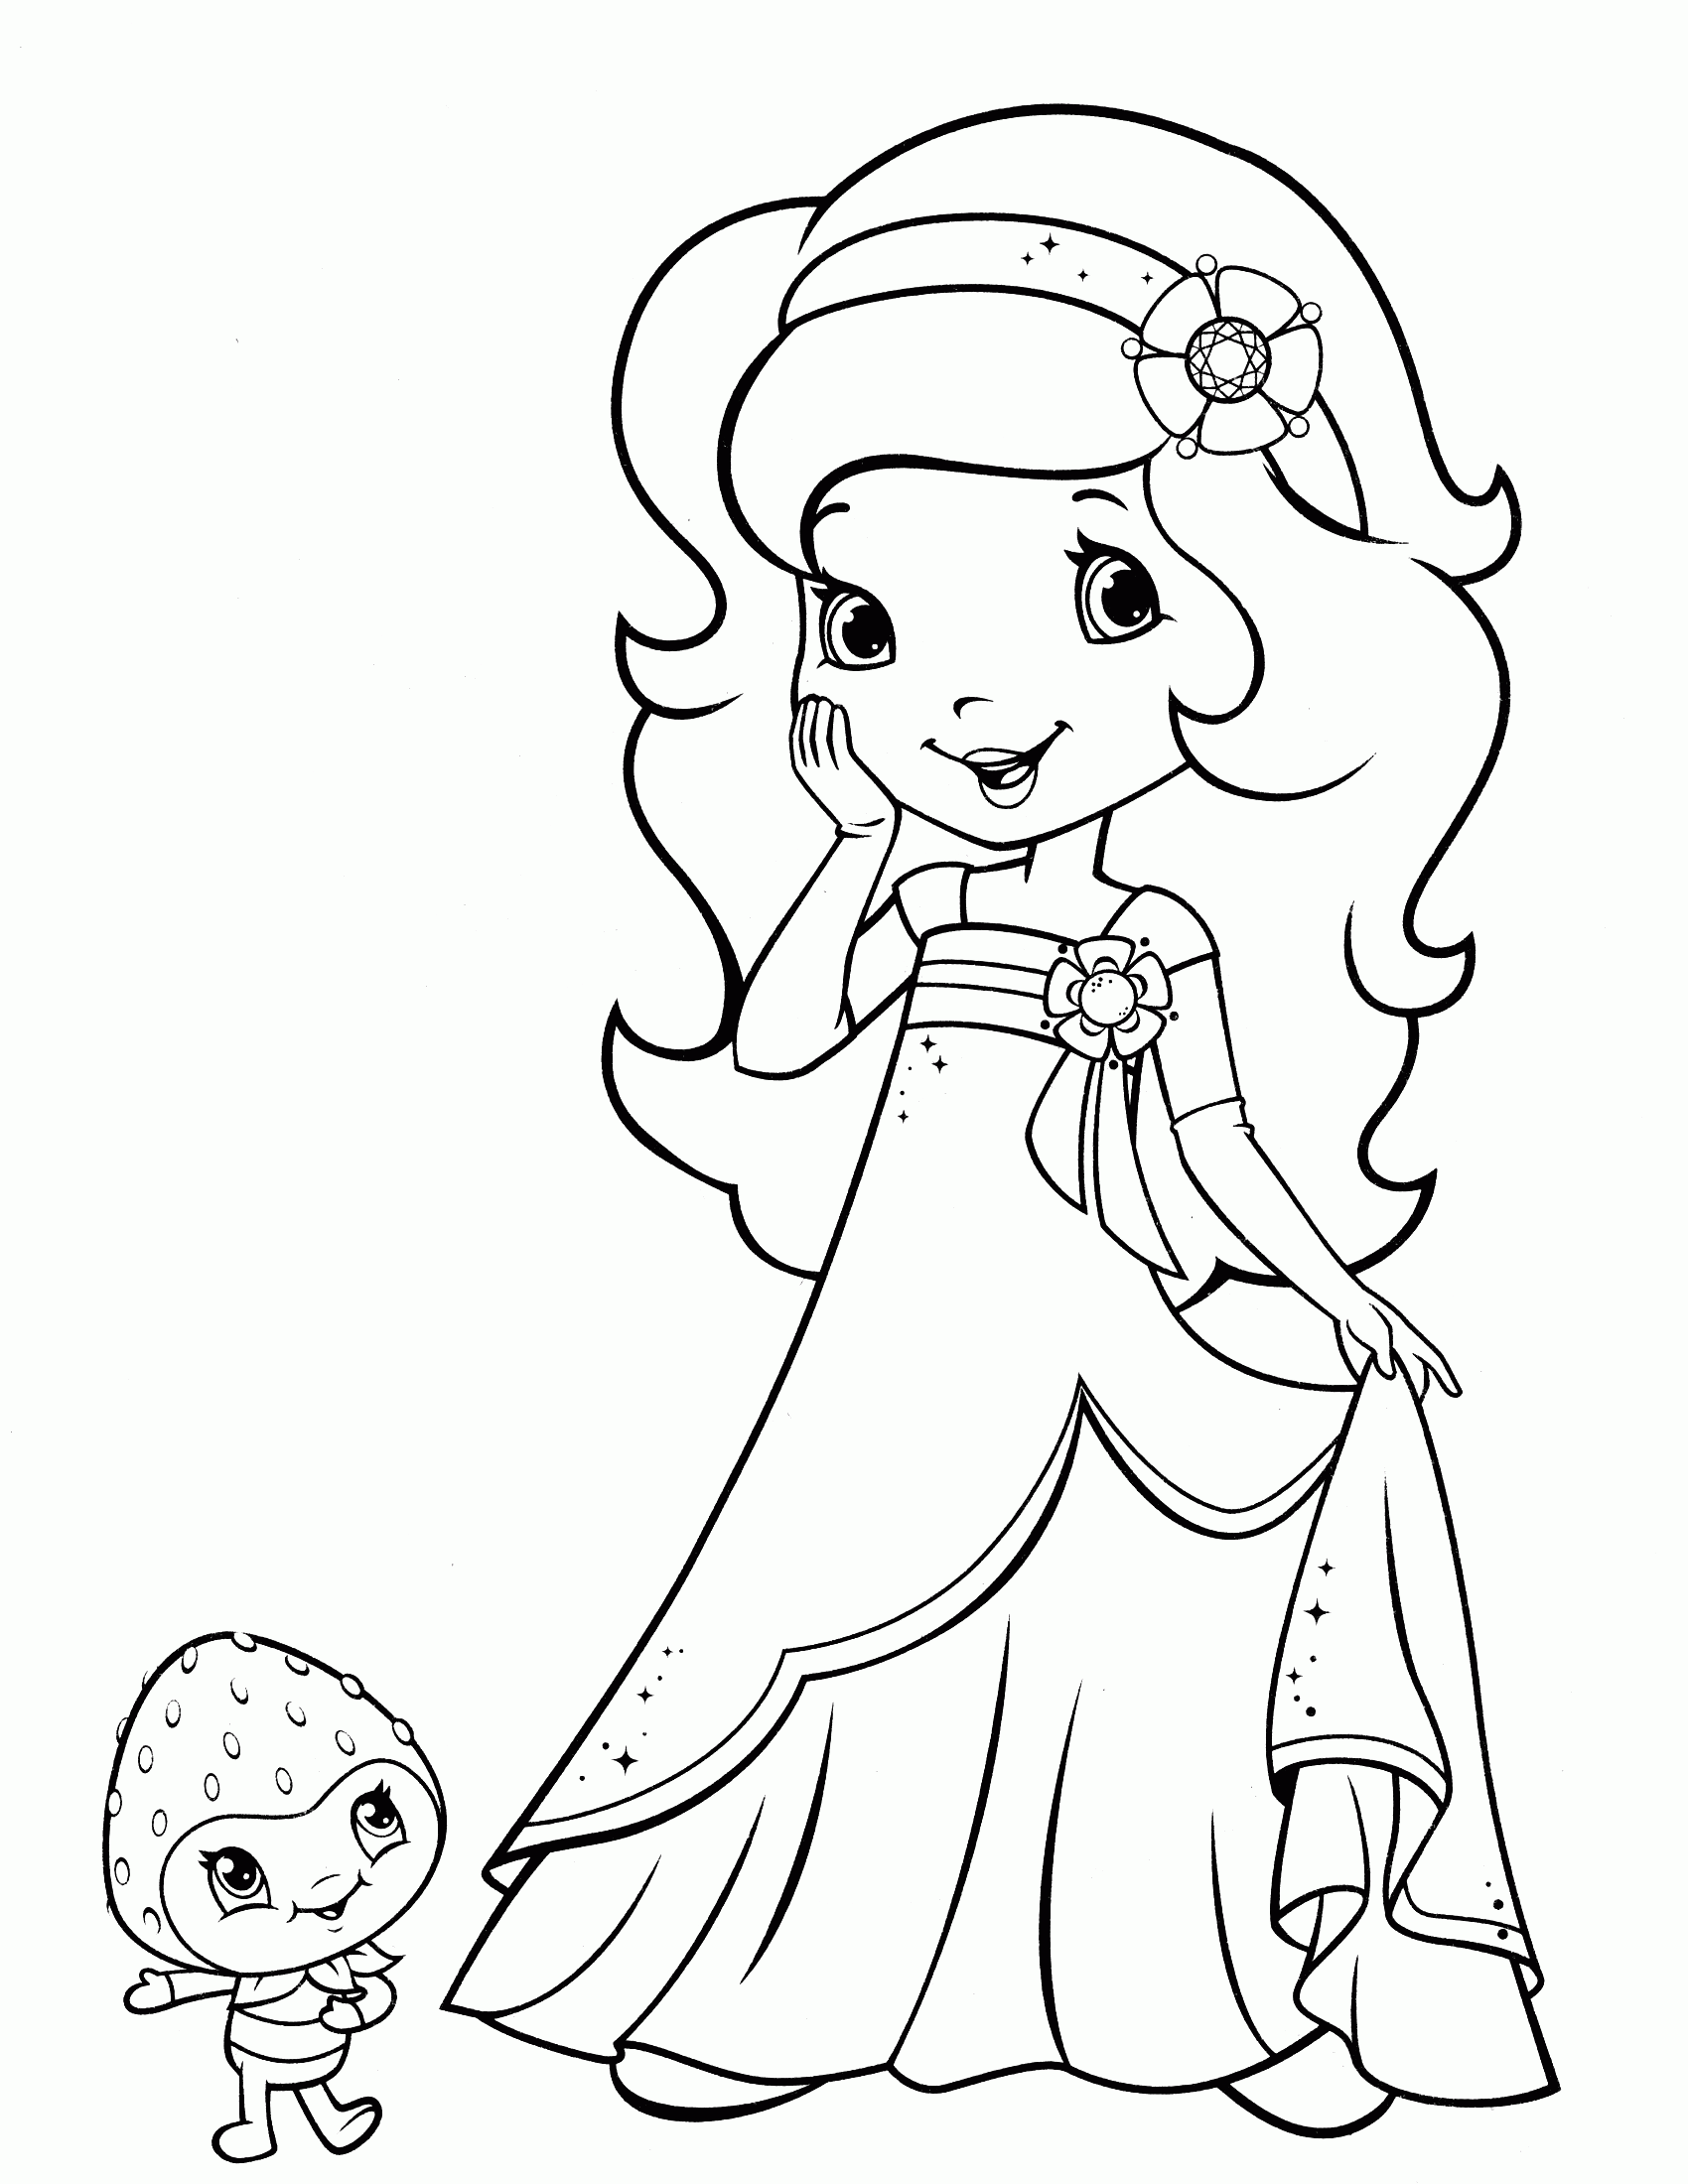 Coloring Pages Strawberry Shortcake And Friends - Coloring Page